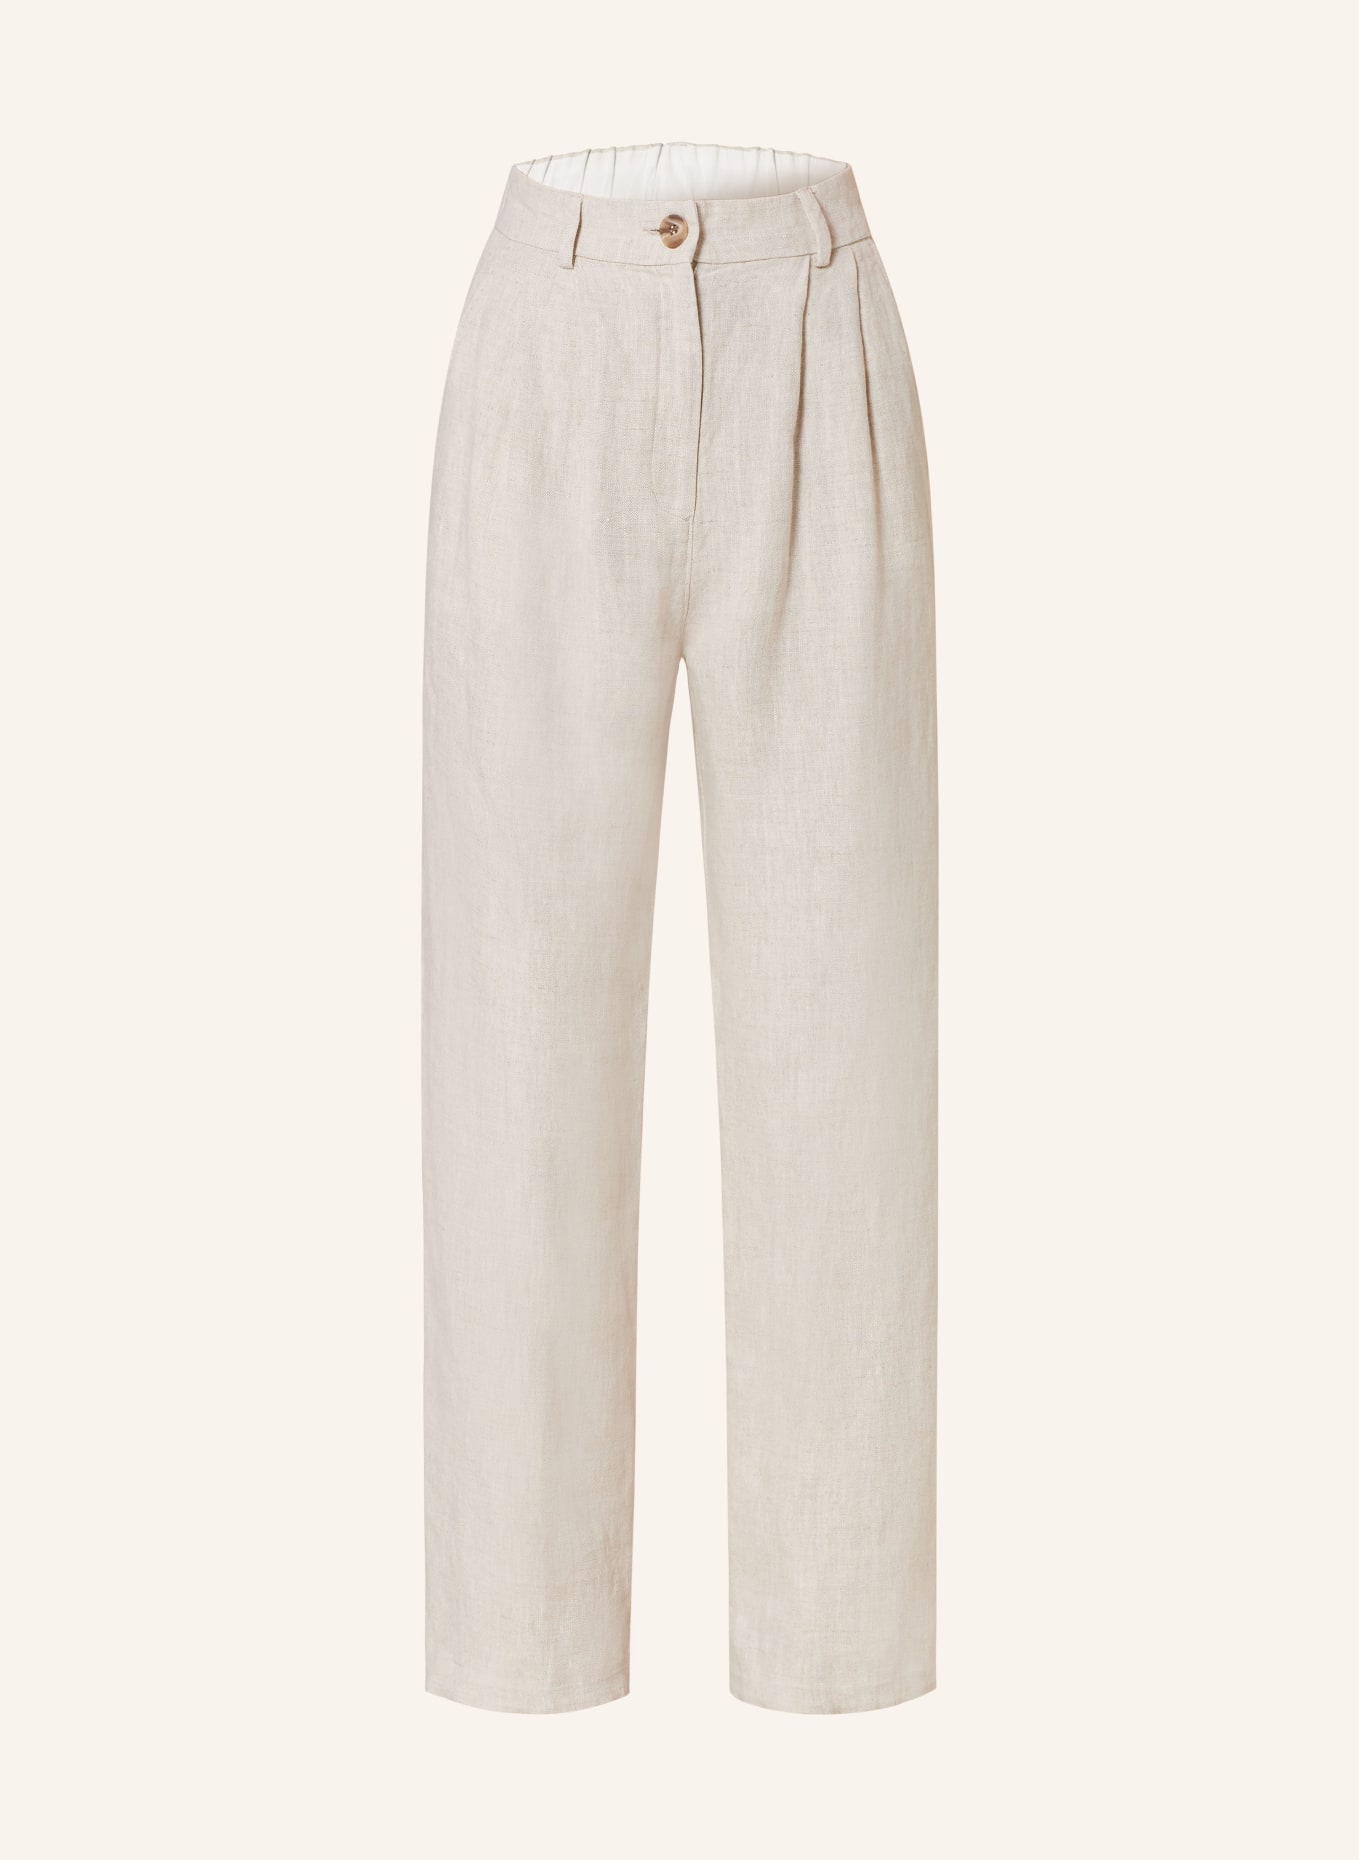 MOS MOSH Linen trousers MMADLANA, Color: LIGHT GRAY (Image 1)